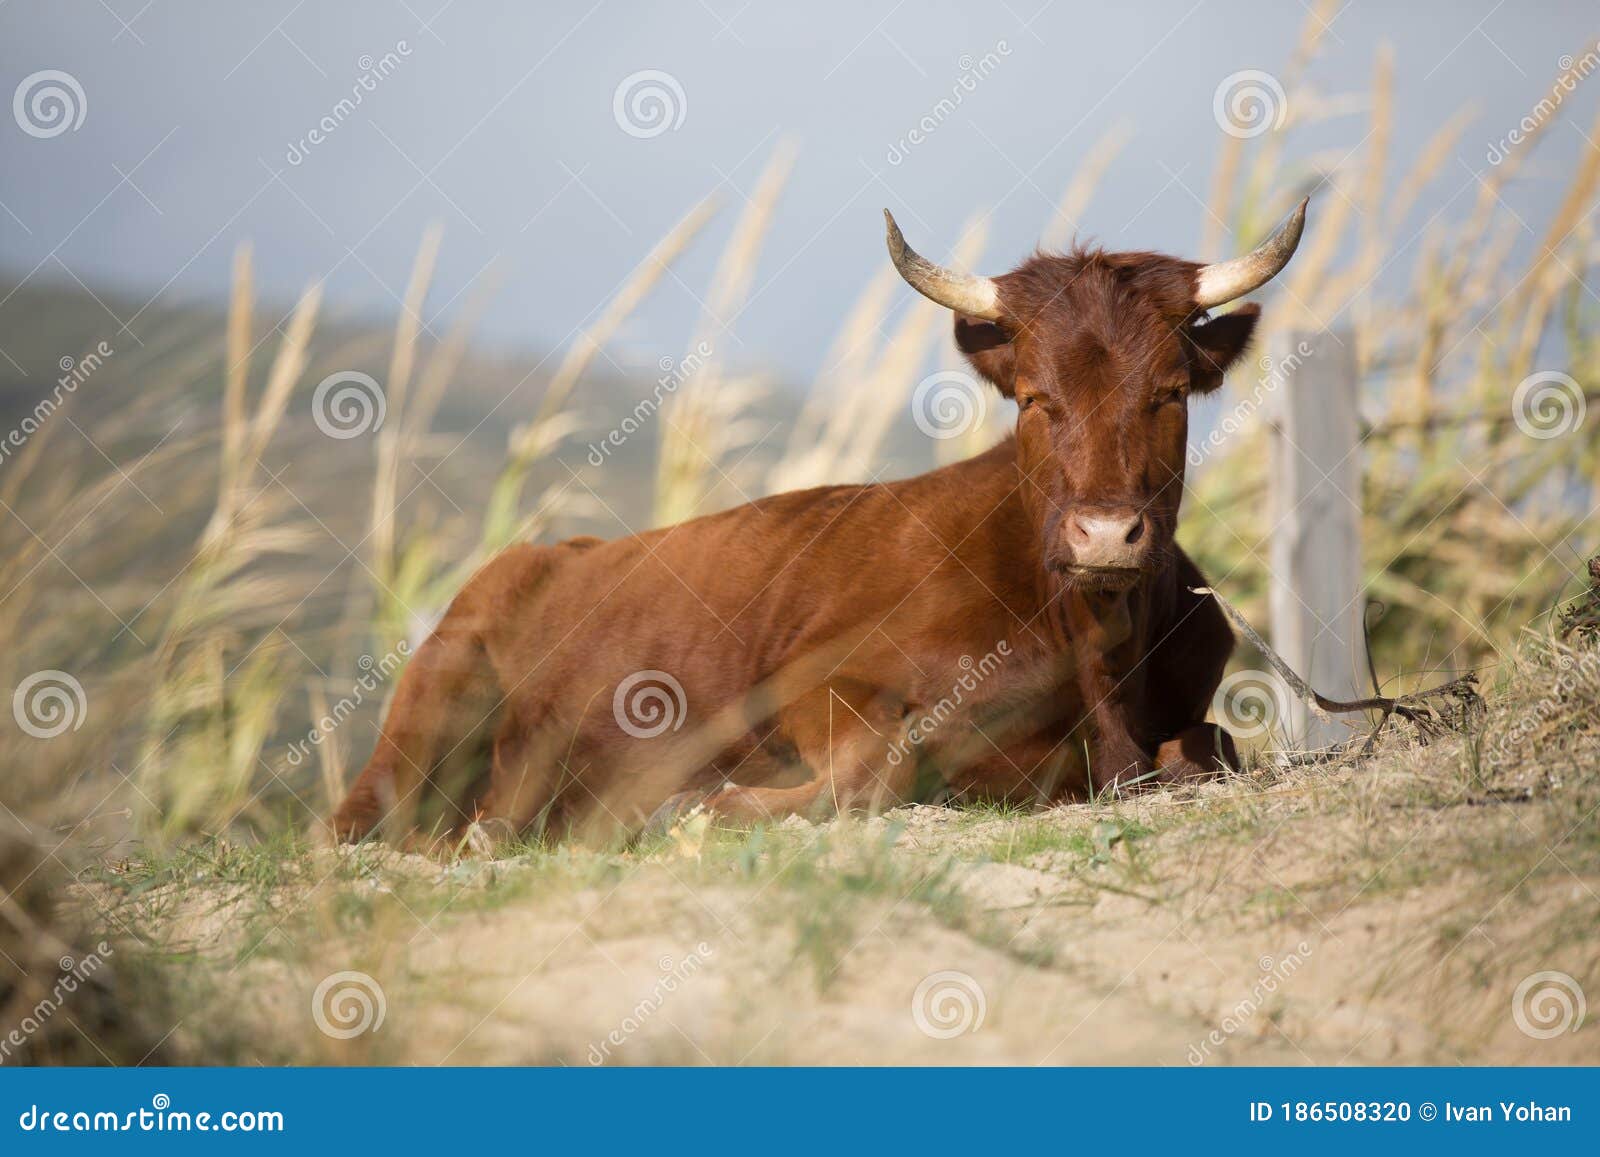 a brown corriente cattle breed with two horns sitting on a meadow